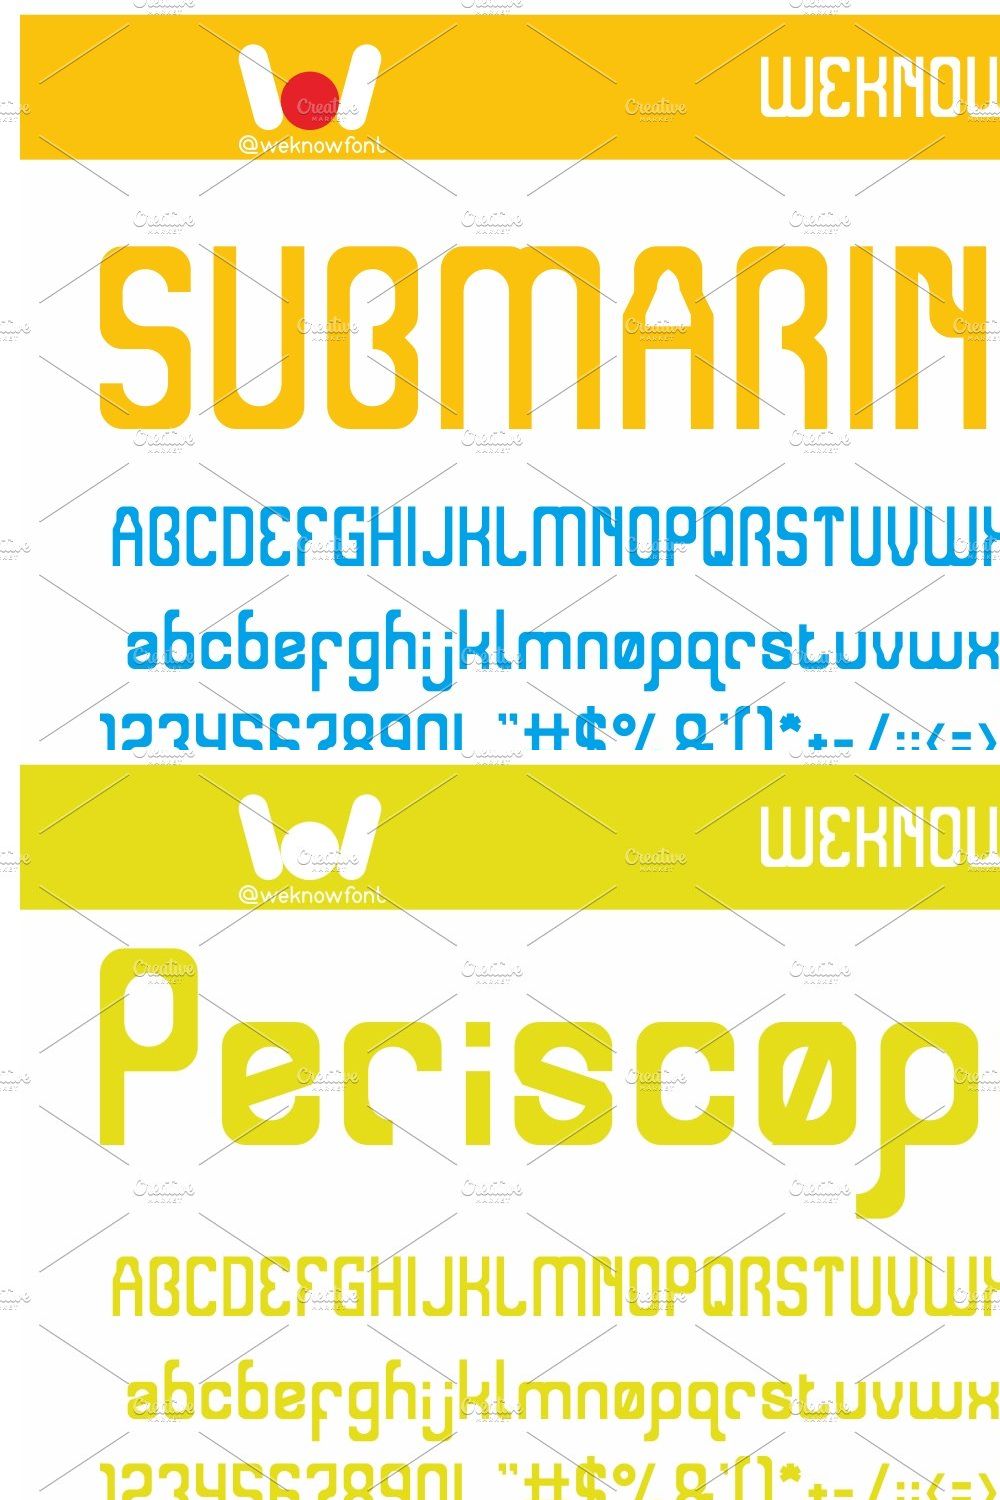 Submarine font pinterest preview image.